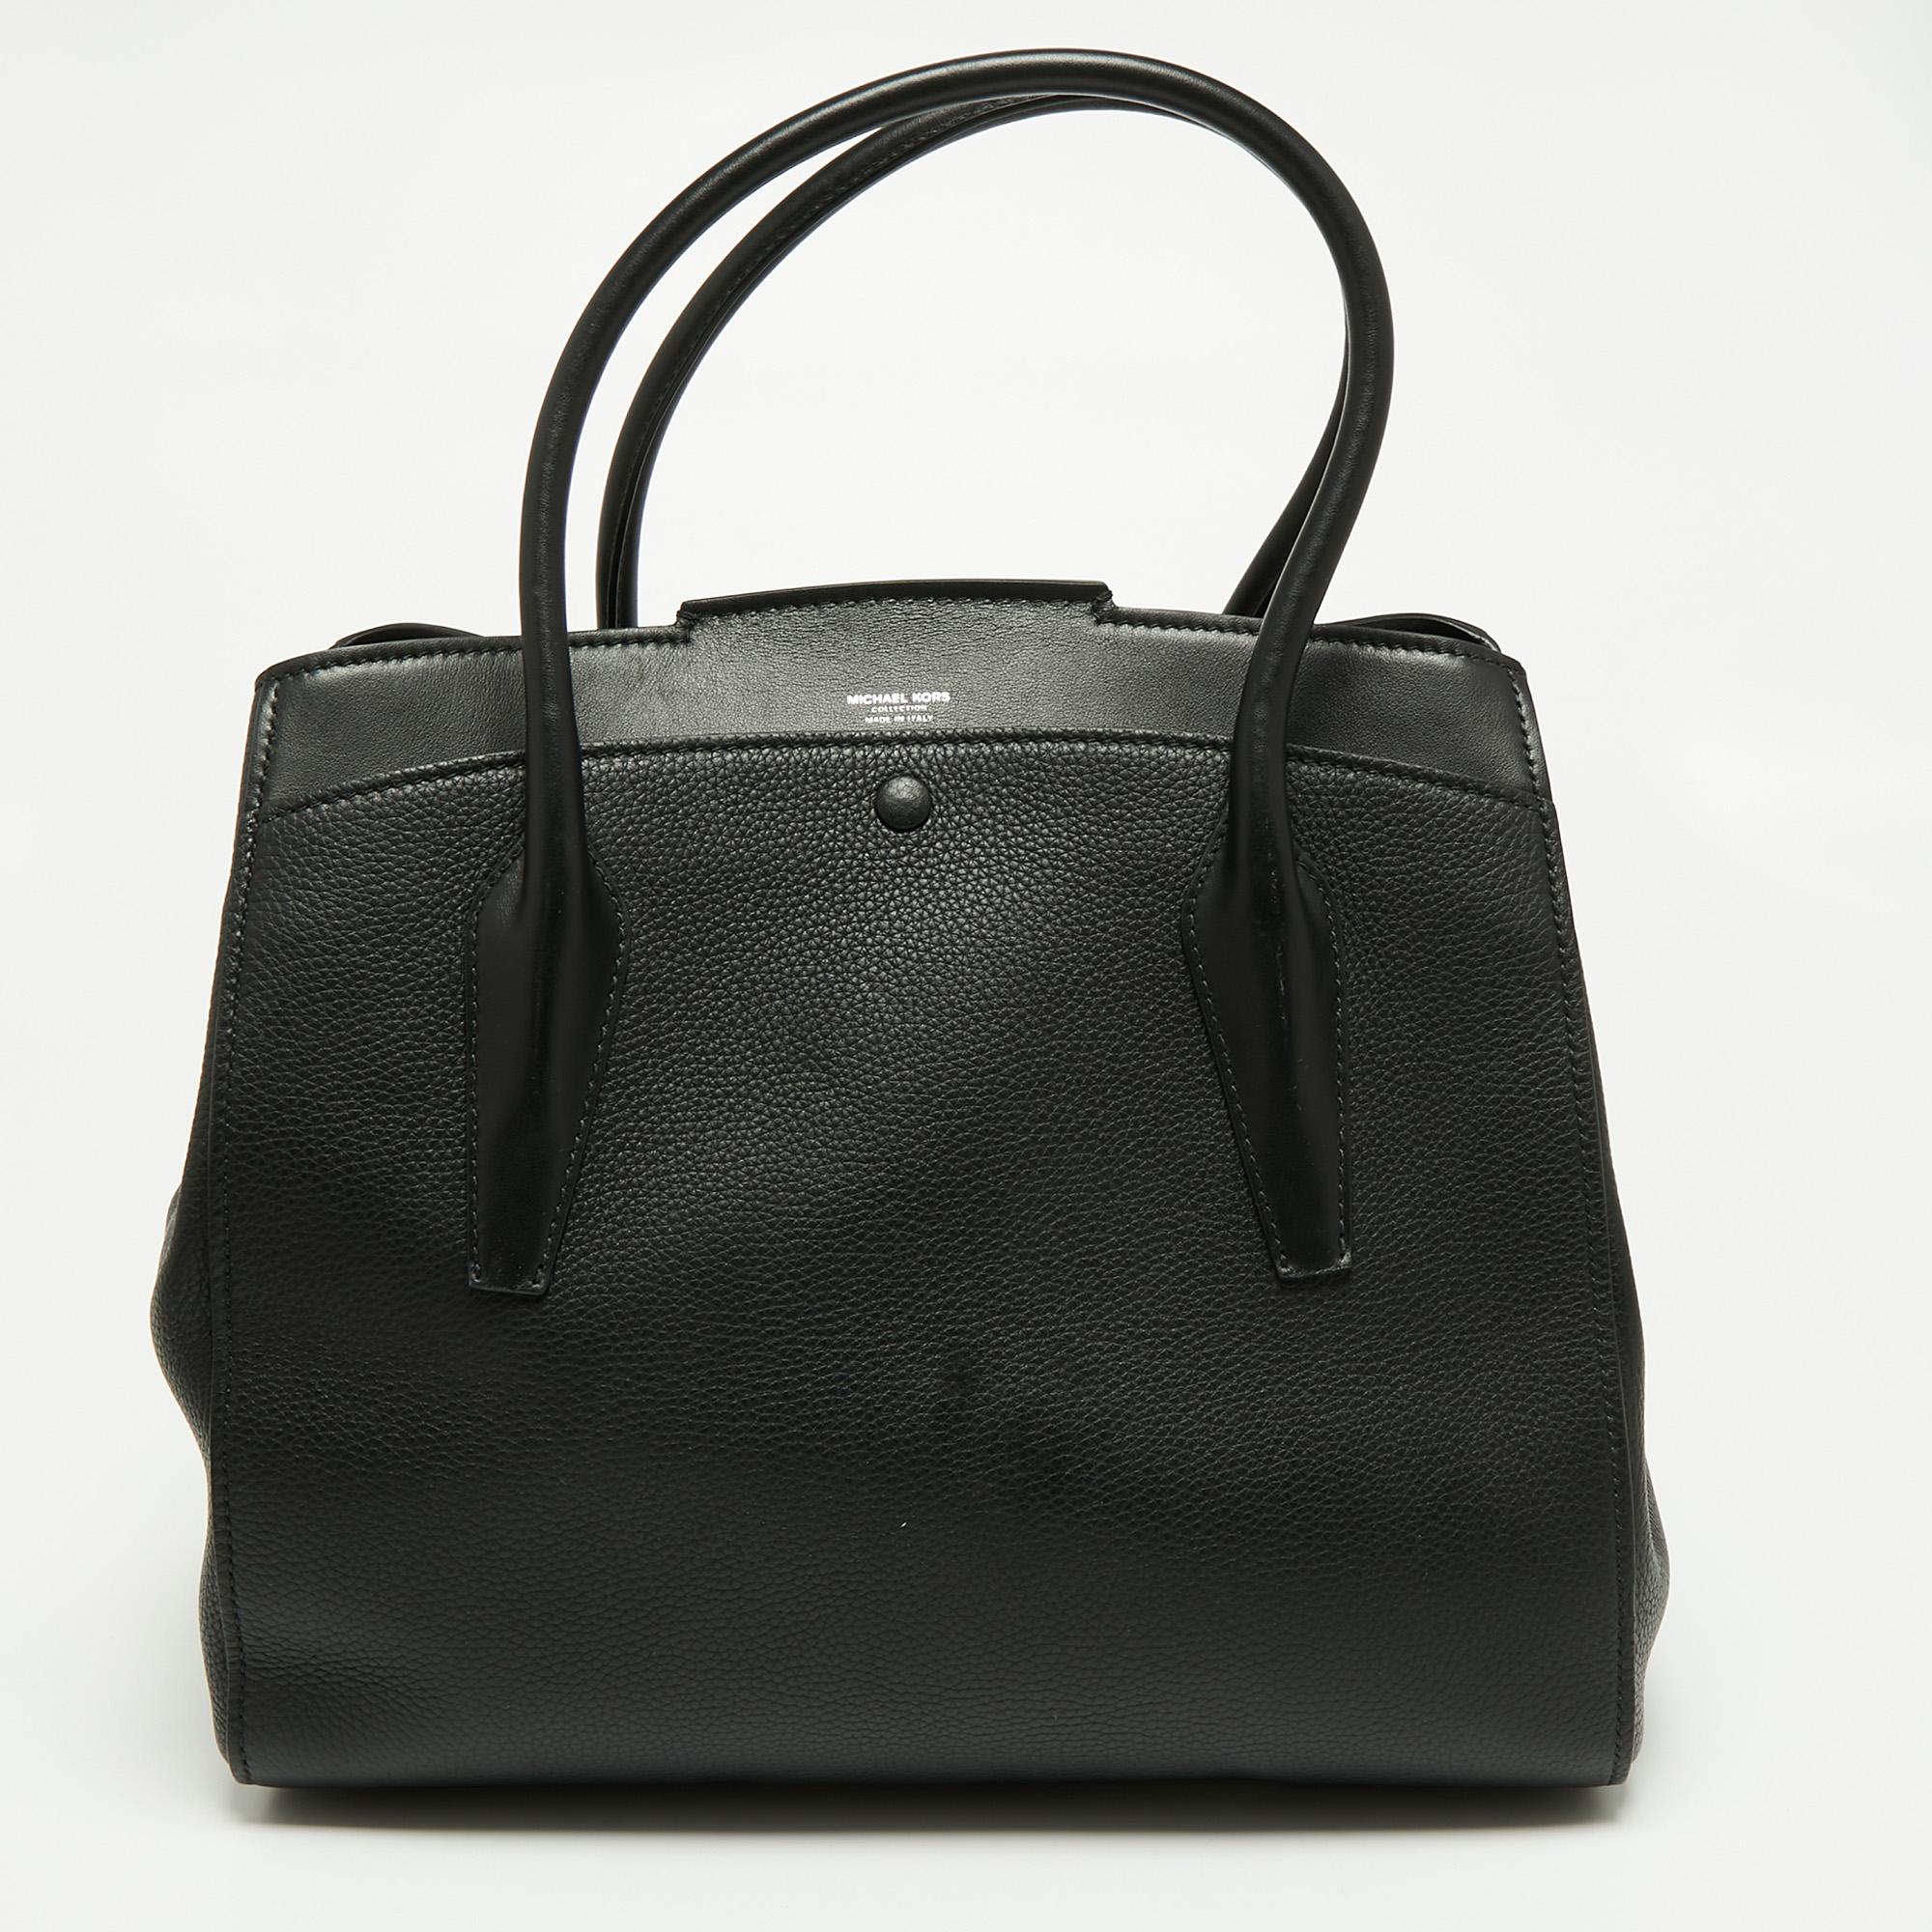 This Blancroft tote from Michael Kors Collection is great for everyday use. It is designed using black leather, which is embellished with silver-tone hardware. It showcases two handles and a fabric-lined interior. This tote will make you look classy